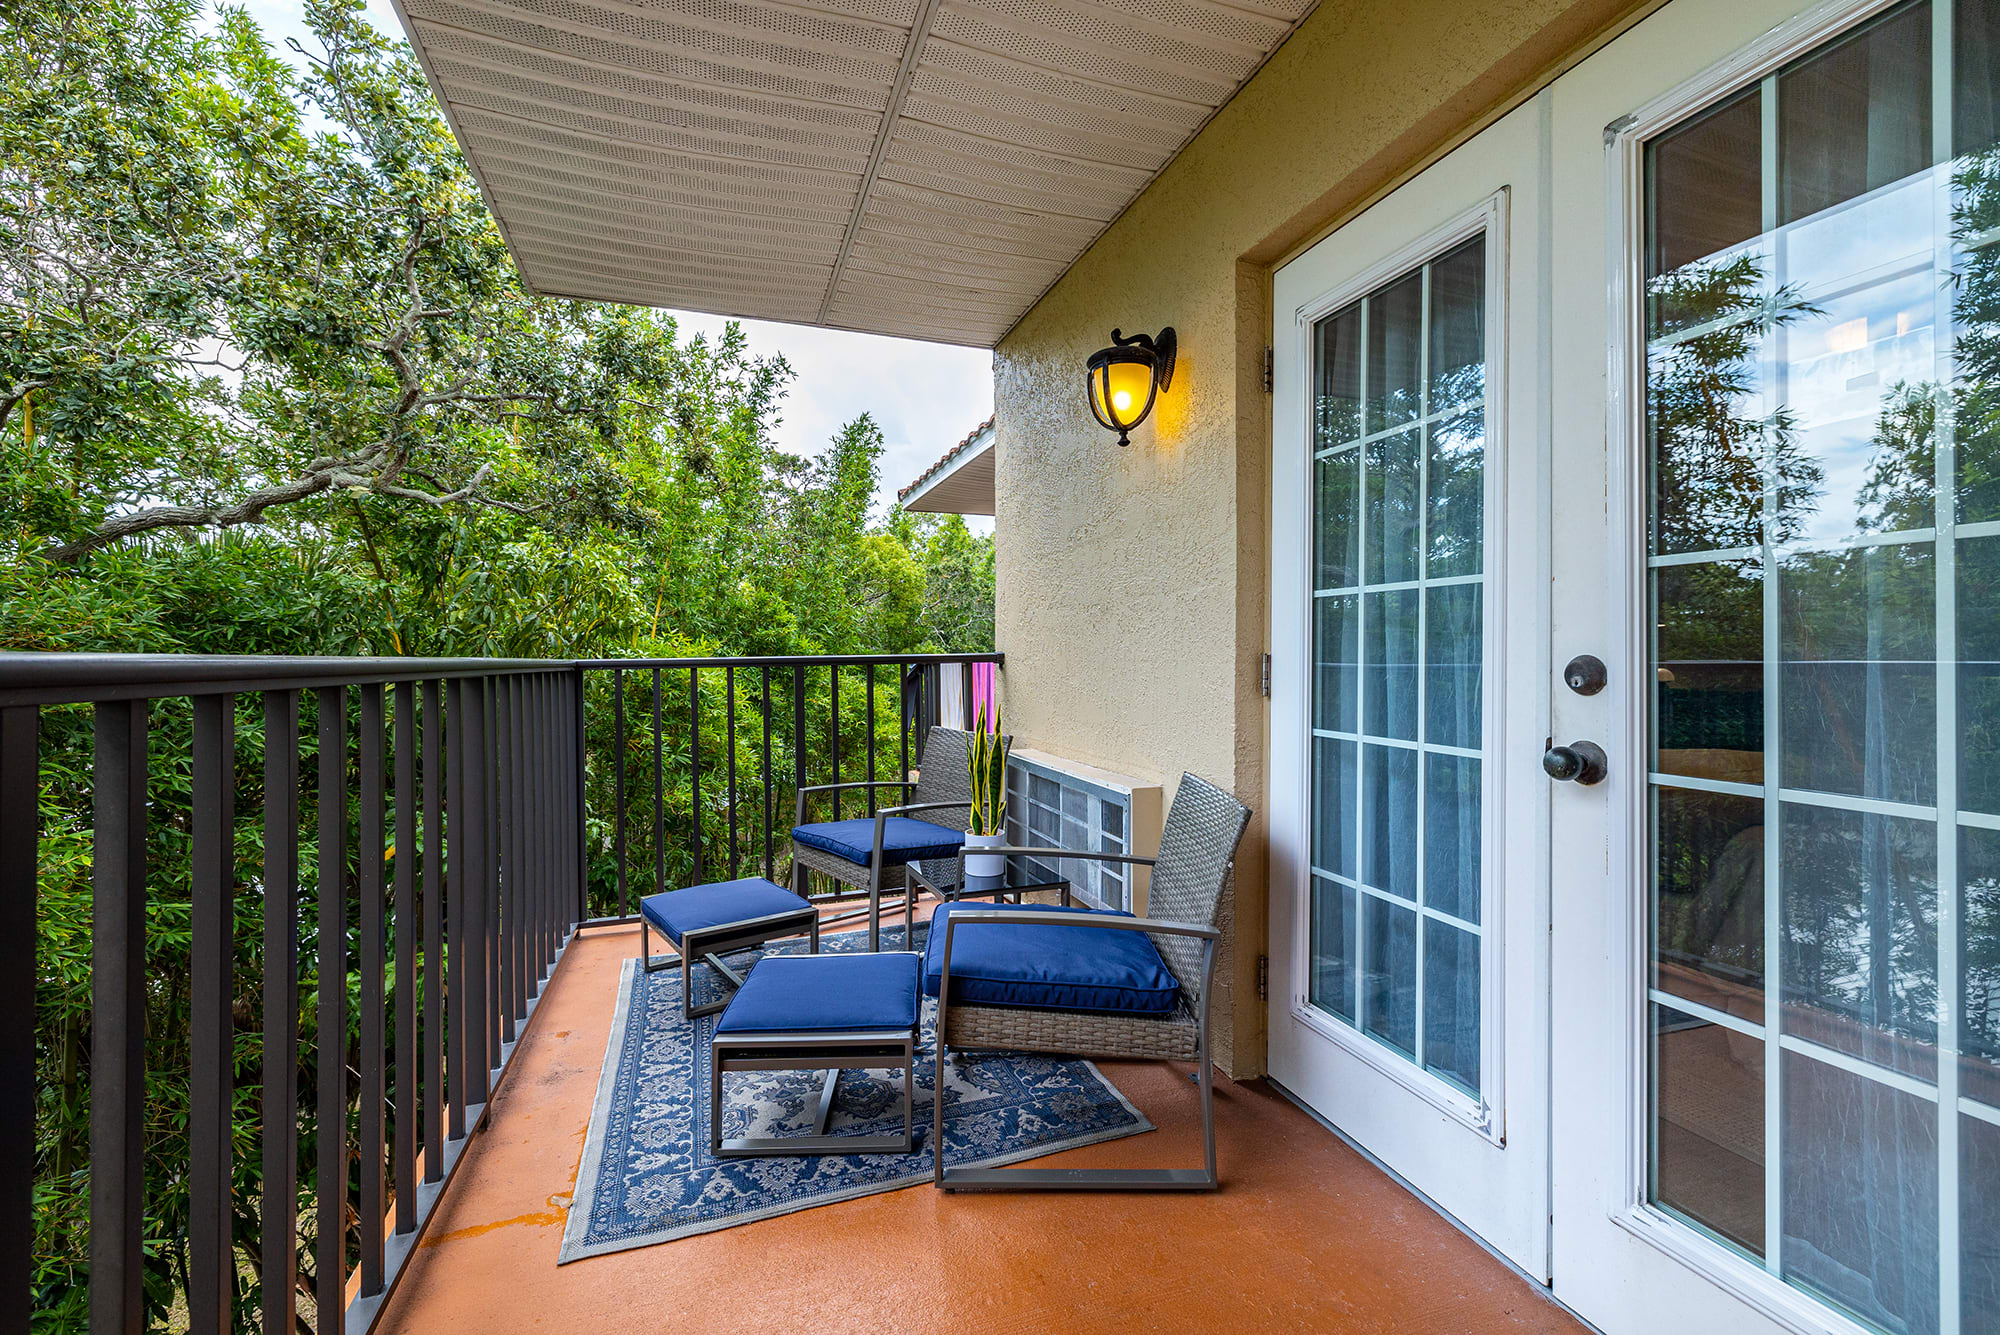 Enjoy some peace and quiet on the private porch